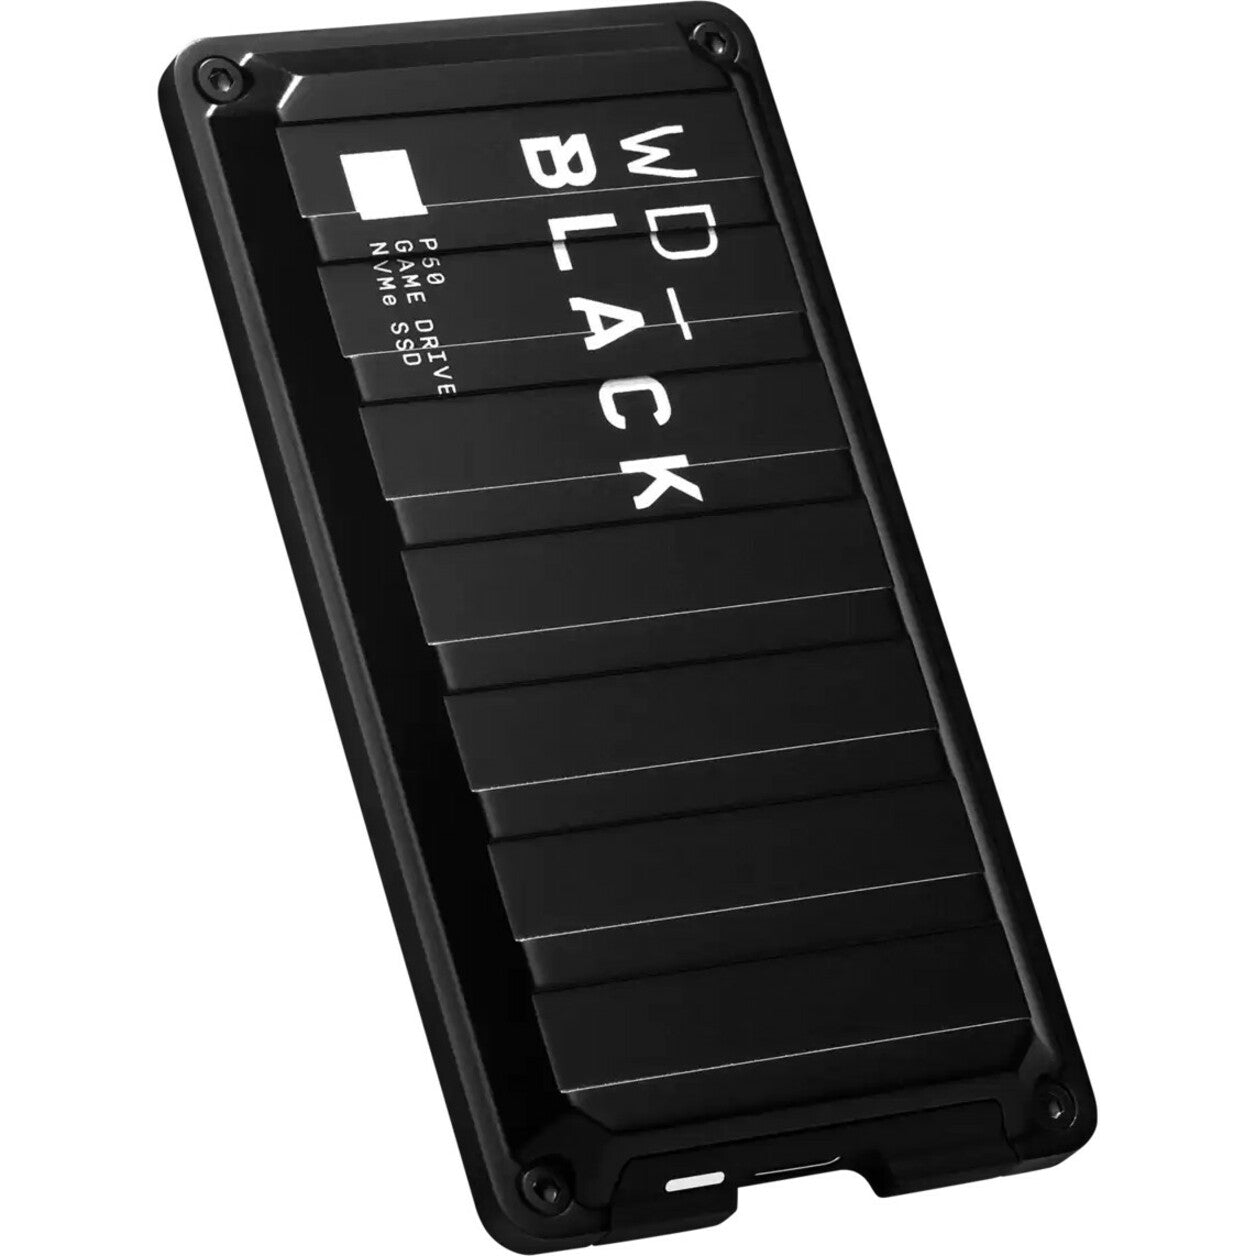 WD WDBA3S0040BBK-WESN BLACK P50 Game Drive SSD, 4TB Portable Solid State Drive - External